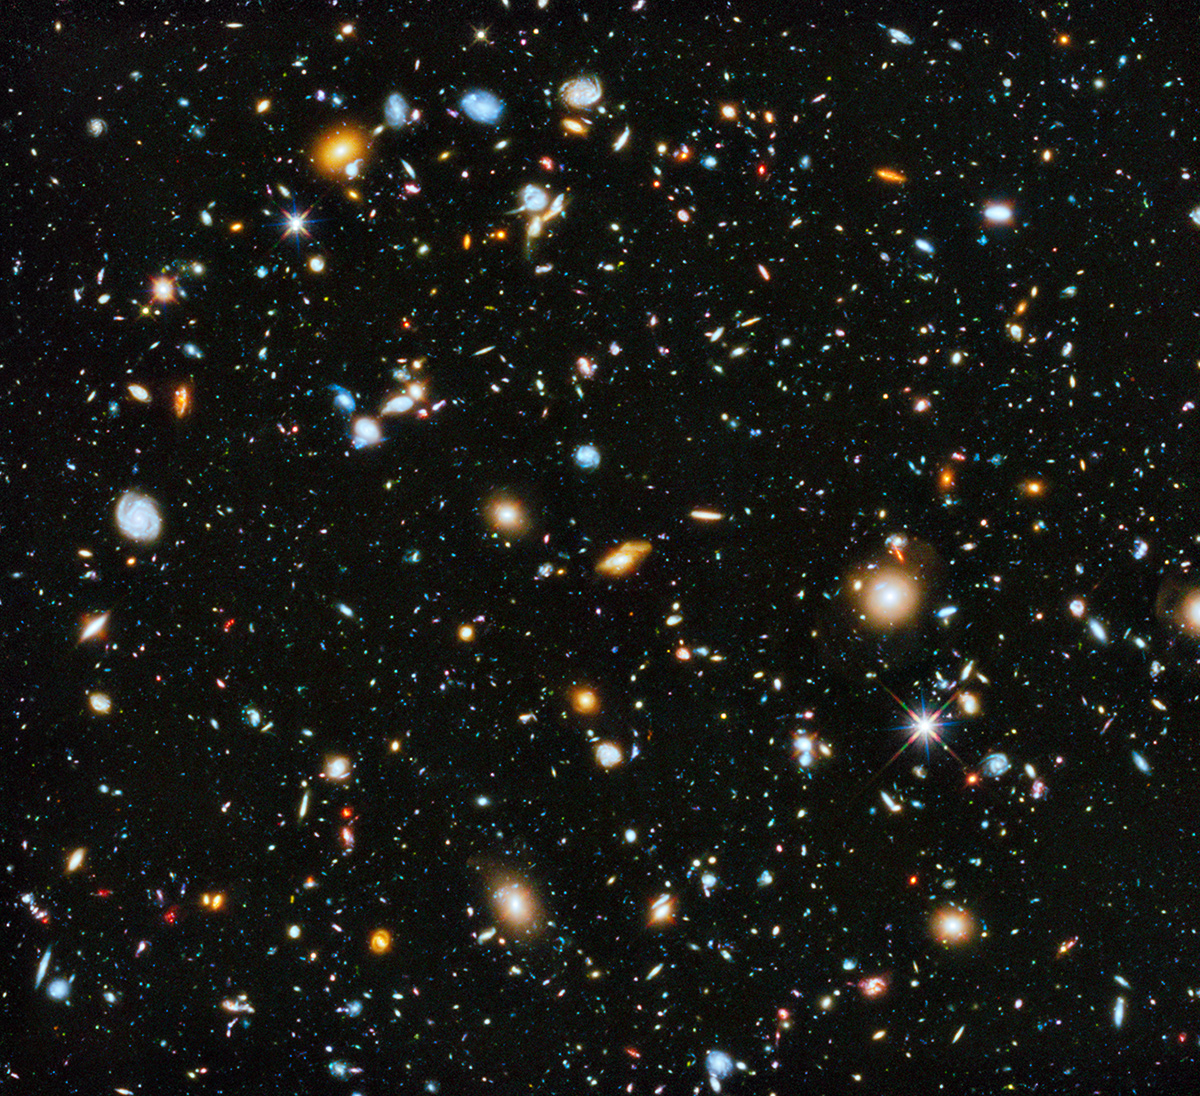 Where are they? It’s a big question and a big universe. Astronomers using NASA’s Hubble Space Telescope have assembled this Hubble Ultra Deep Field 2014 picture.